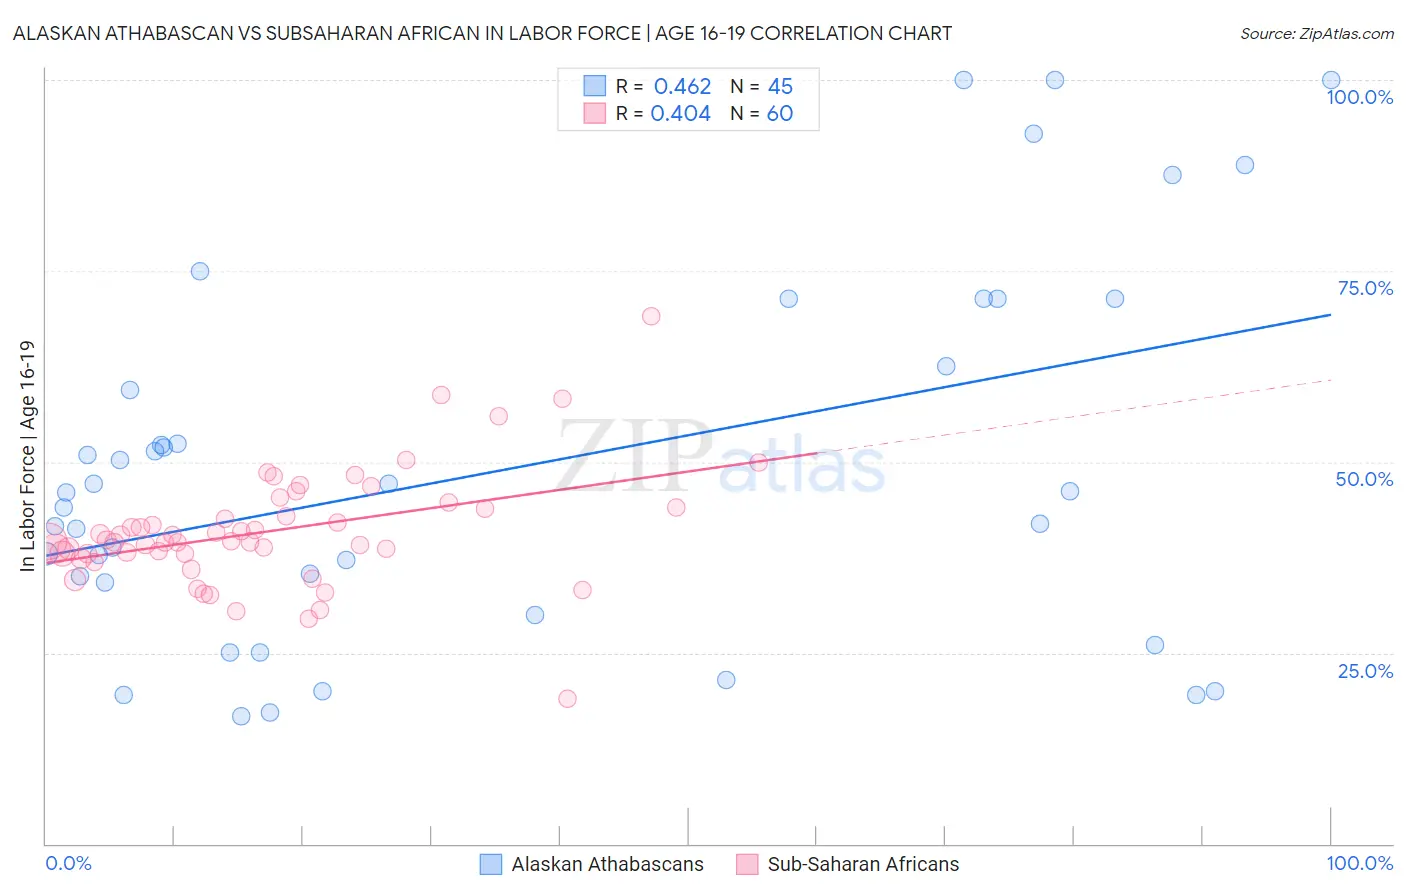 Alaskan Athabascan vs Subsaharan African In Labor Force | Age 16-19